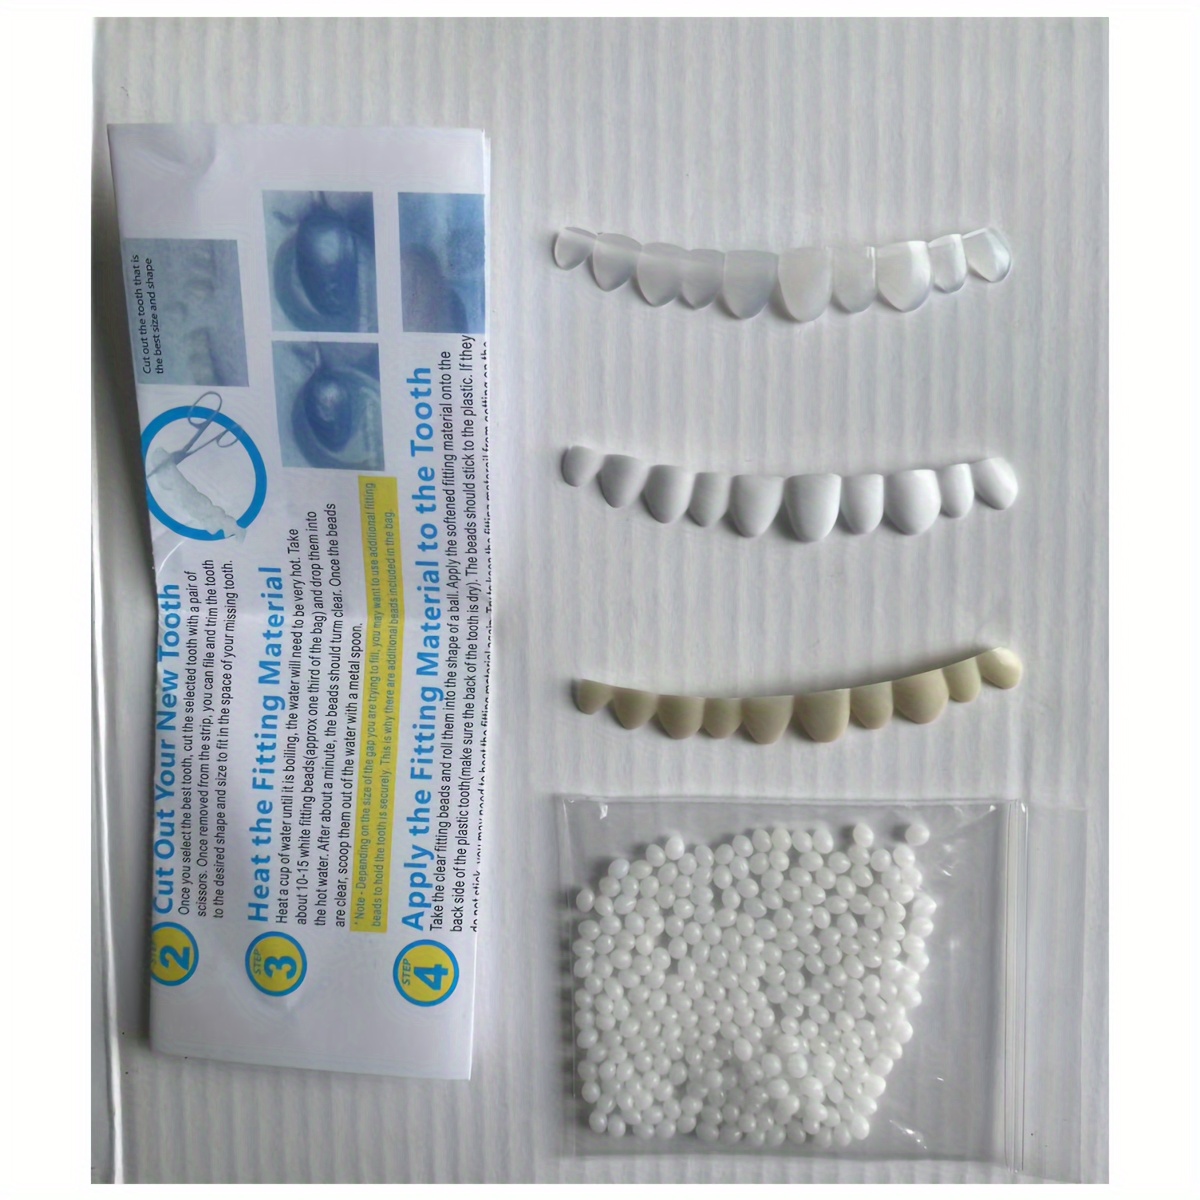 

Temporary Braces Set, Plastic Material - Restorative Smile Enhancer With 3 Shades For Natural And Bright Smiles